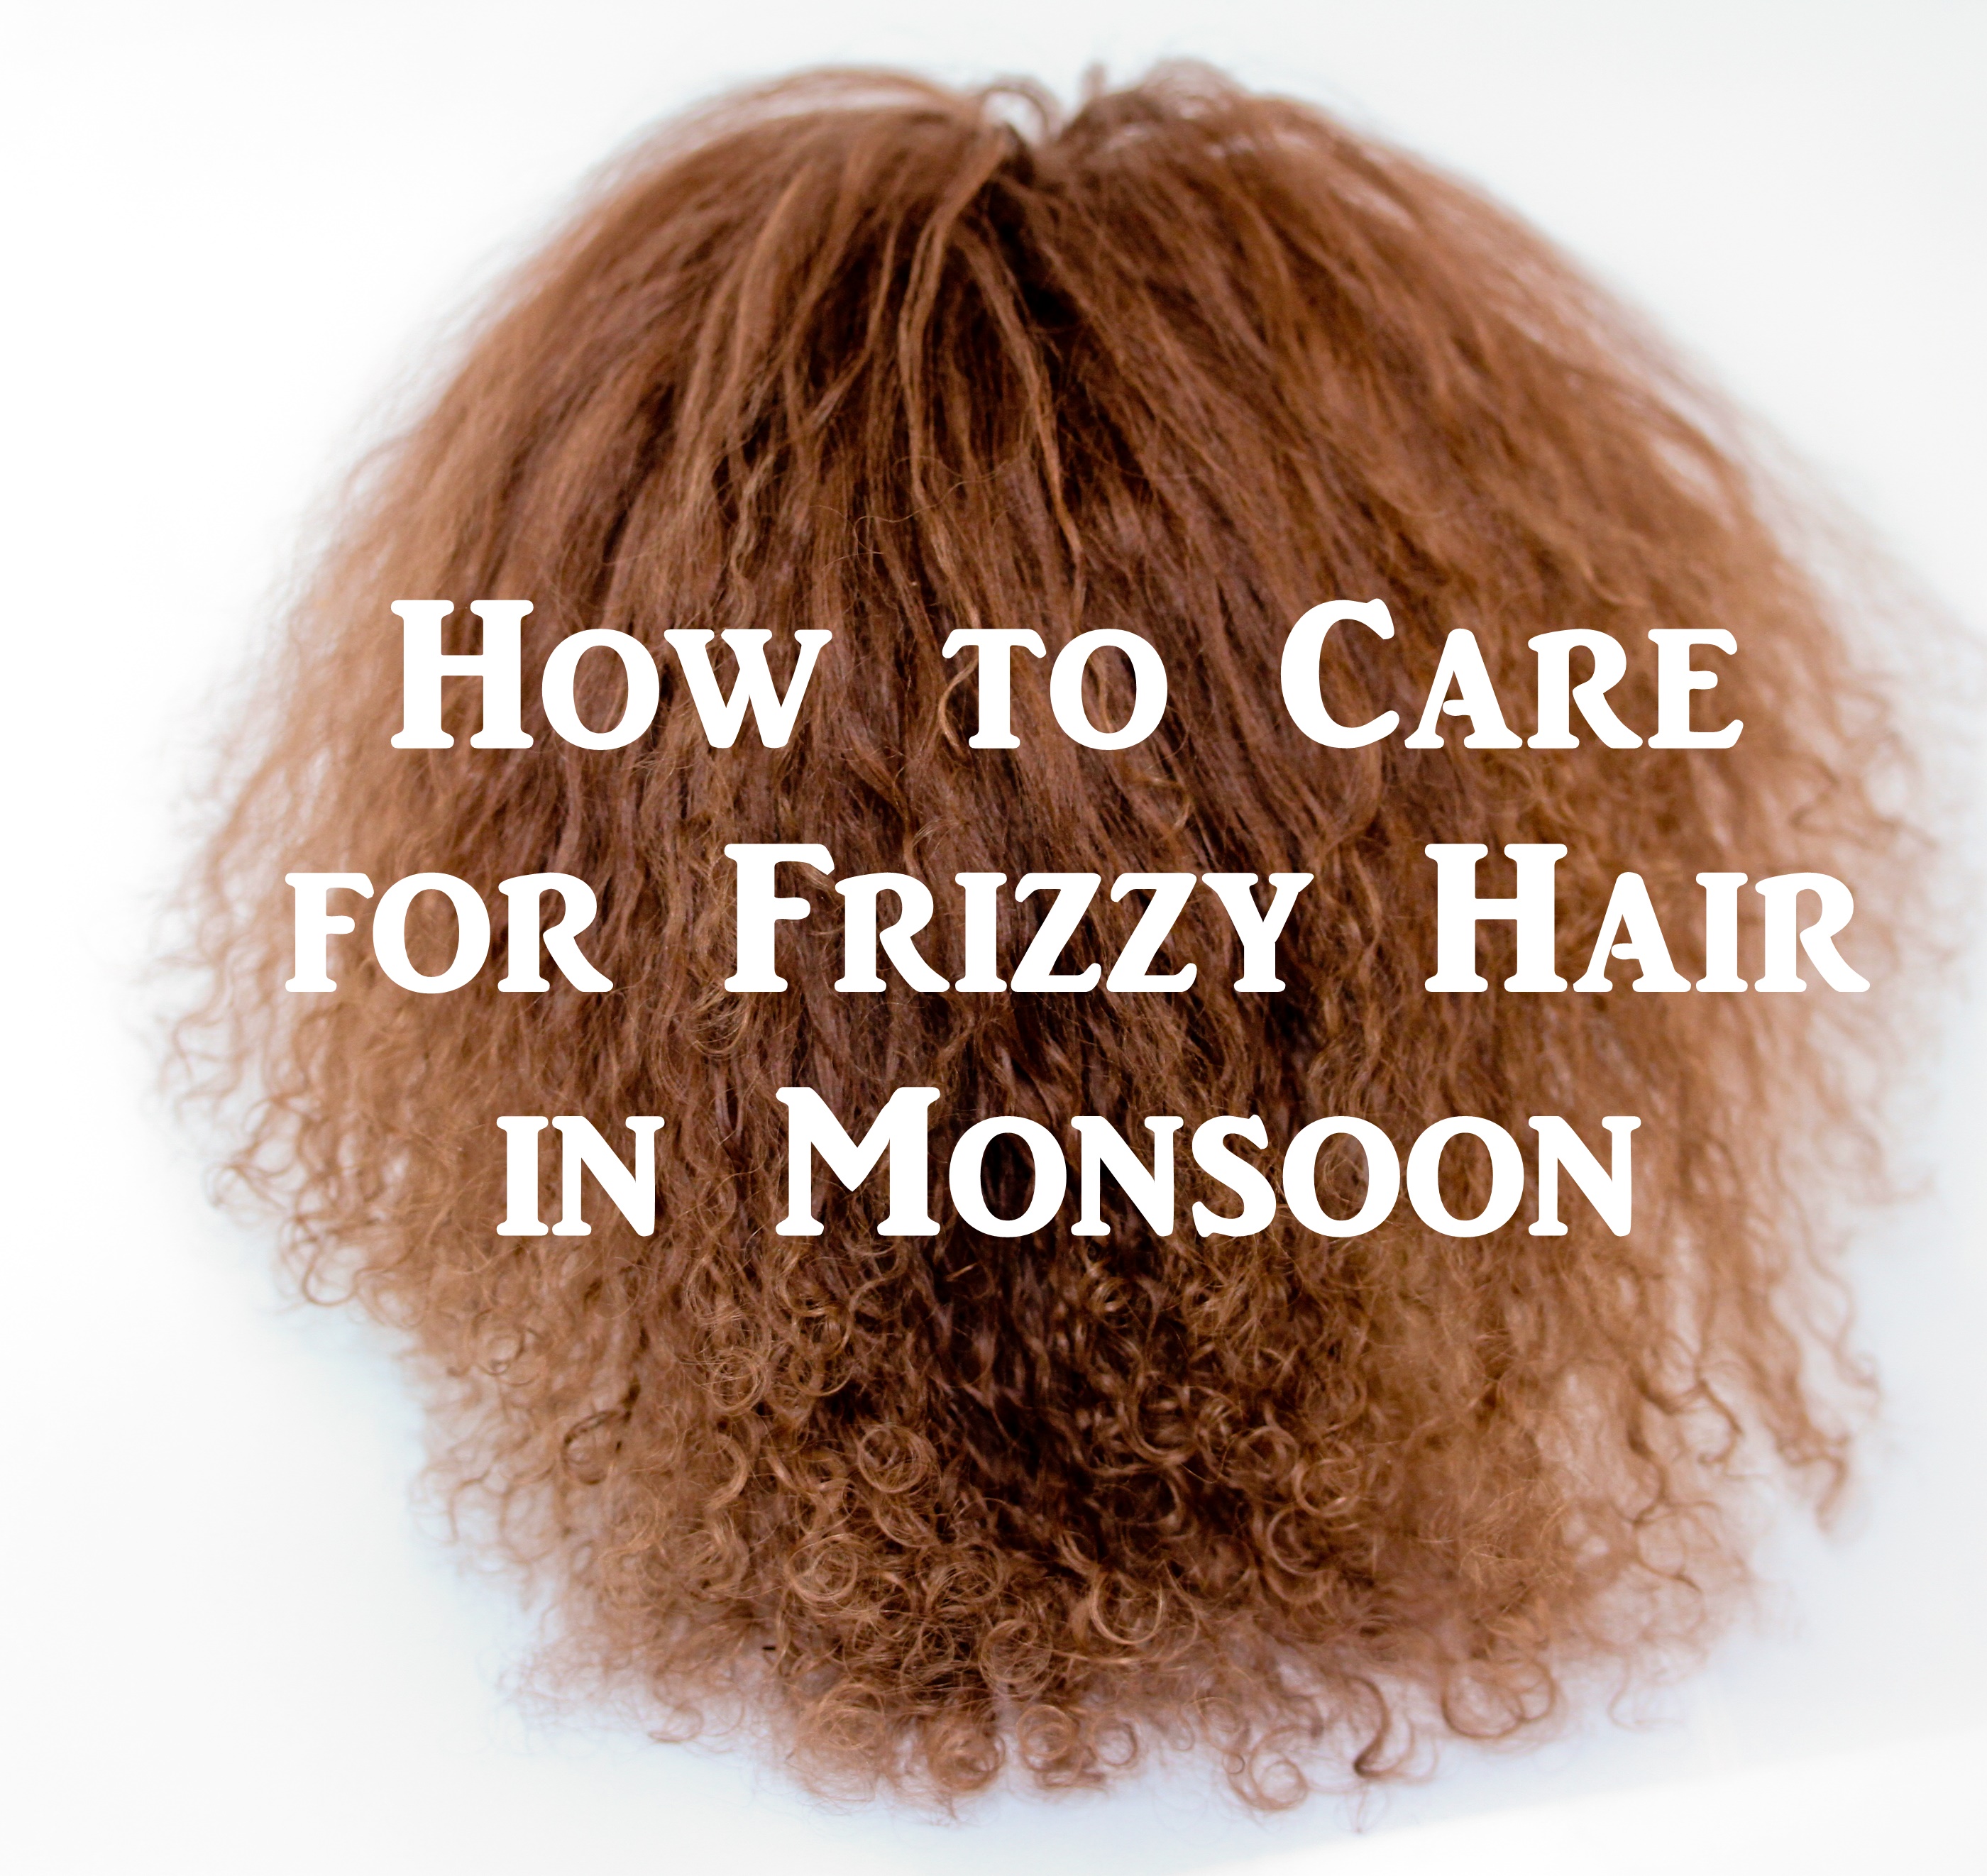 How to Care for Frizzy Hair in Monsoon